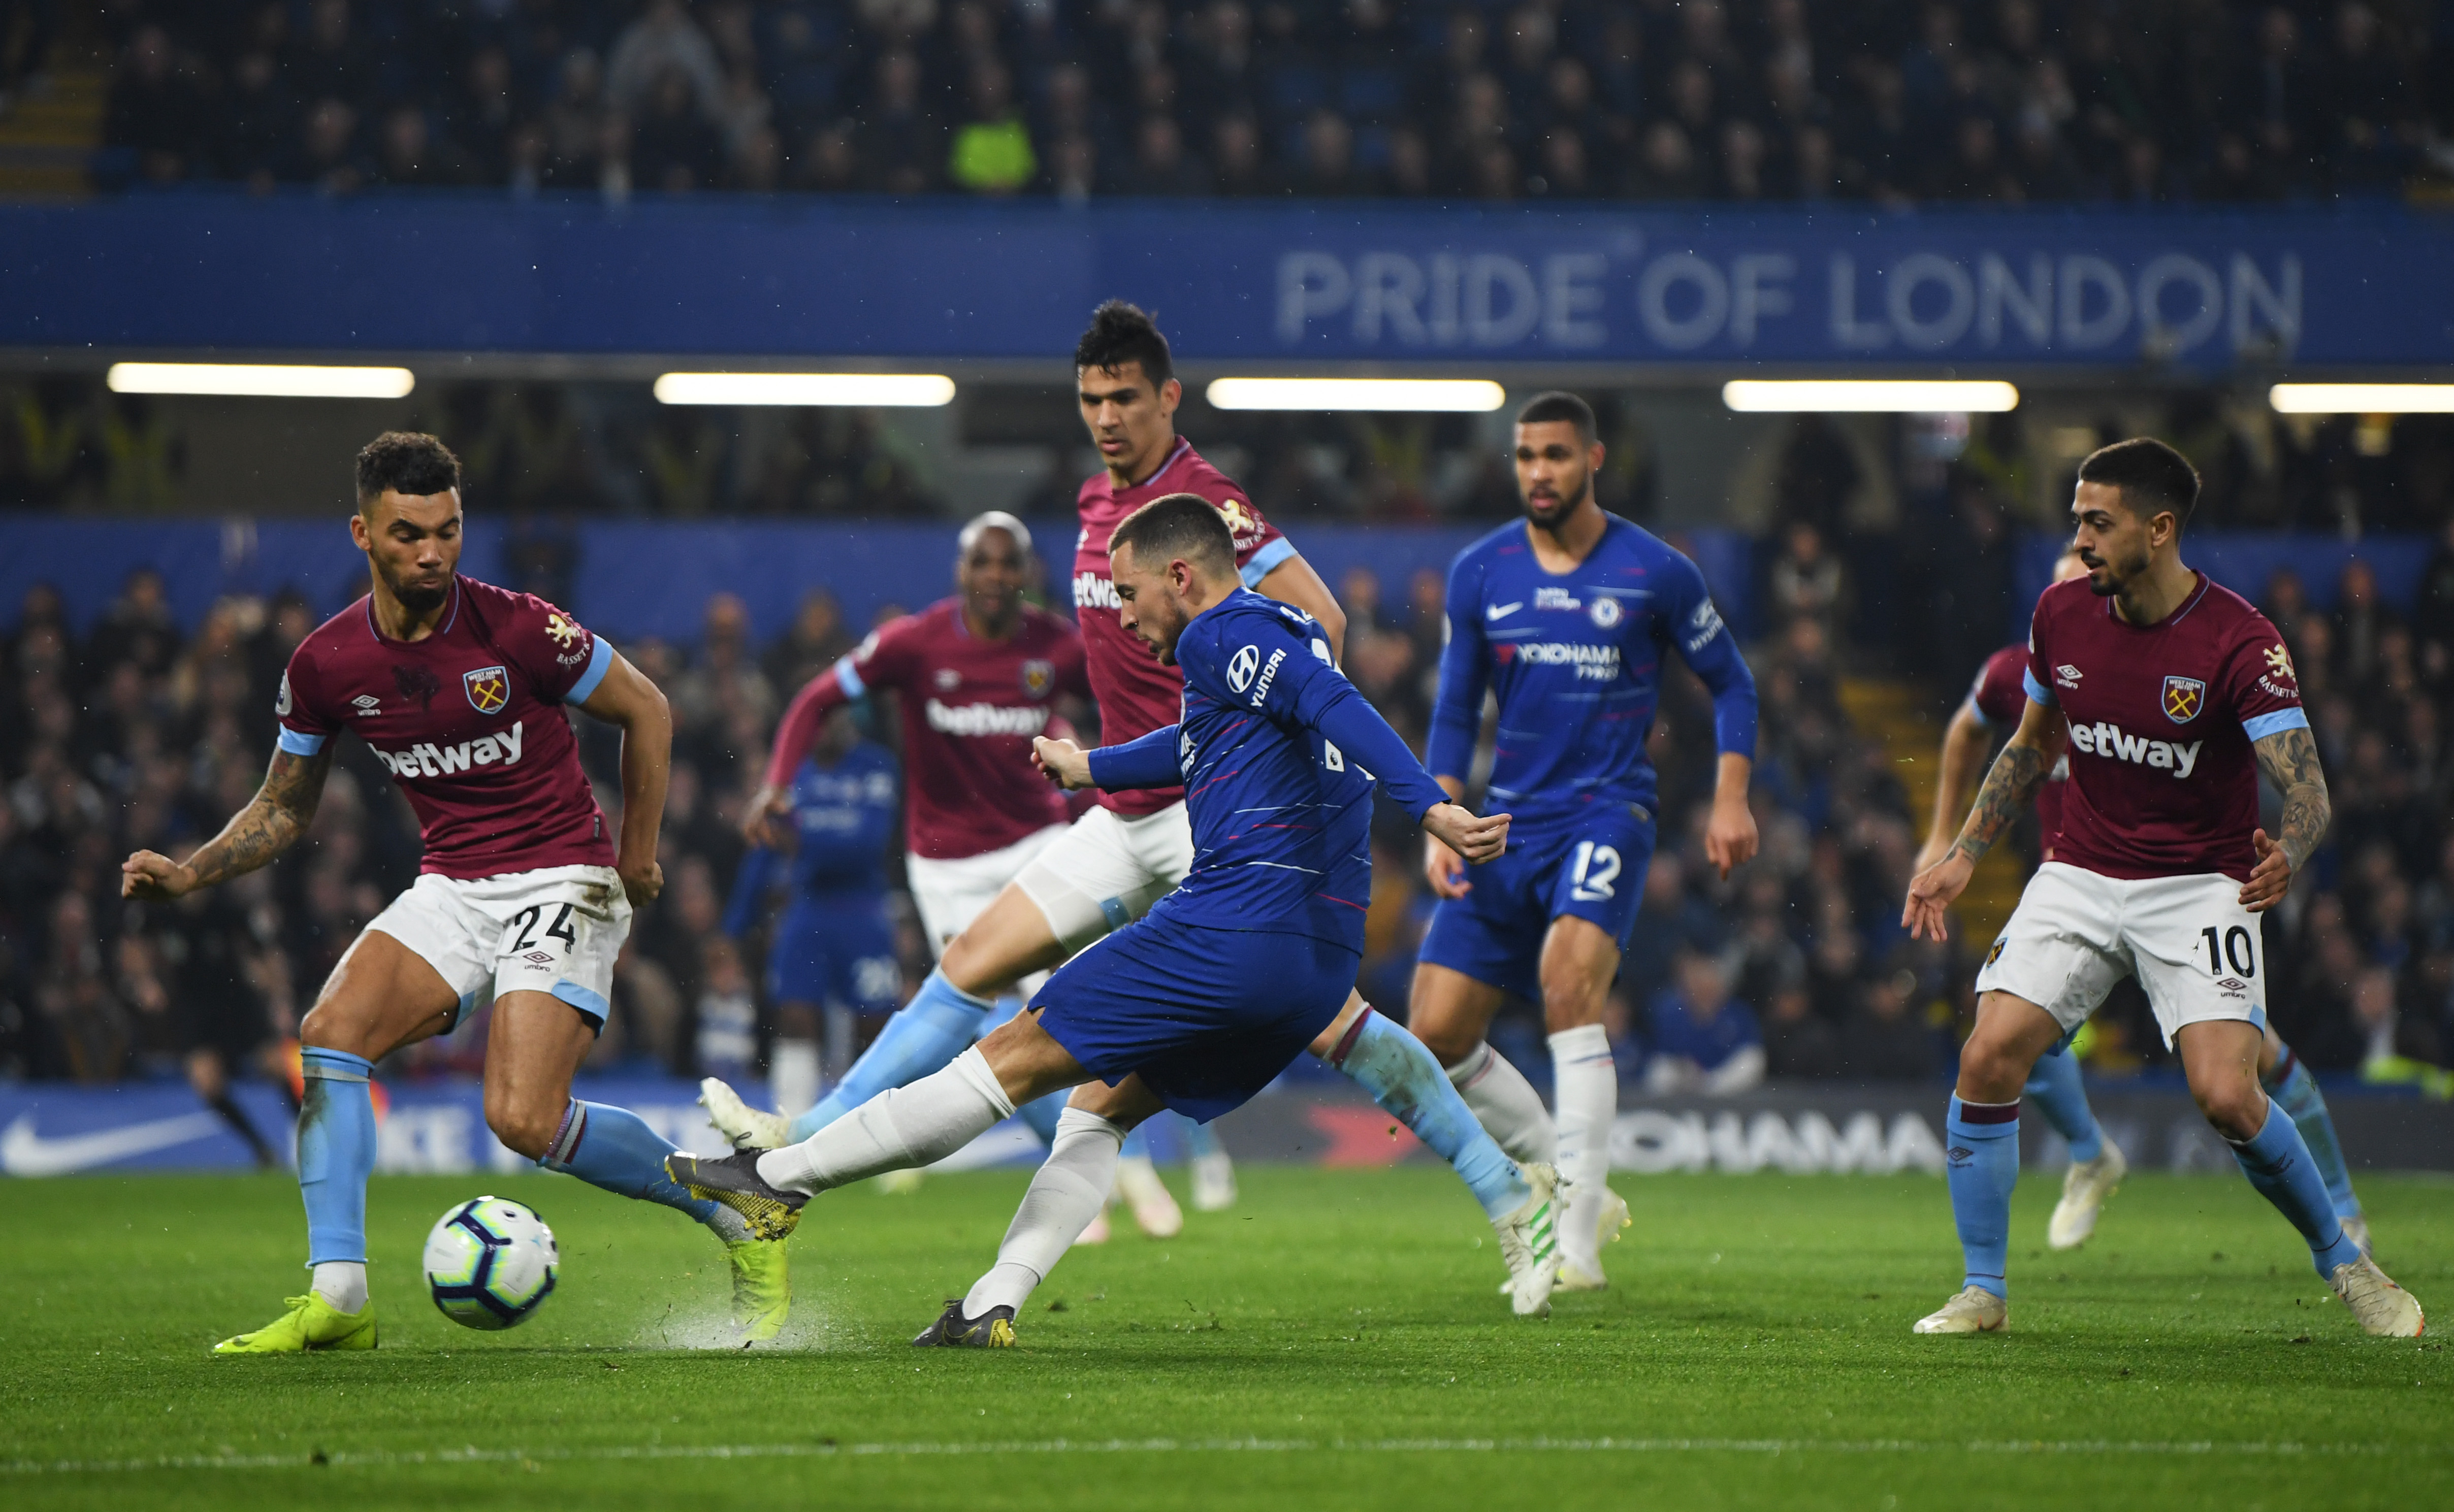 LONDON, ENGLAND - APRIL 08:  Eden Hazard of Chelsea shoots past Ryan Fredericks of West Ham United during the Premier League match between Chelsea FC and West Ham United at Stamford Bridge on April 08, 2019 in London, United Kingdom. (Photo by Mike Hewitt/Getty Images)